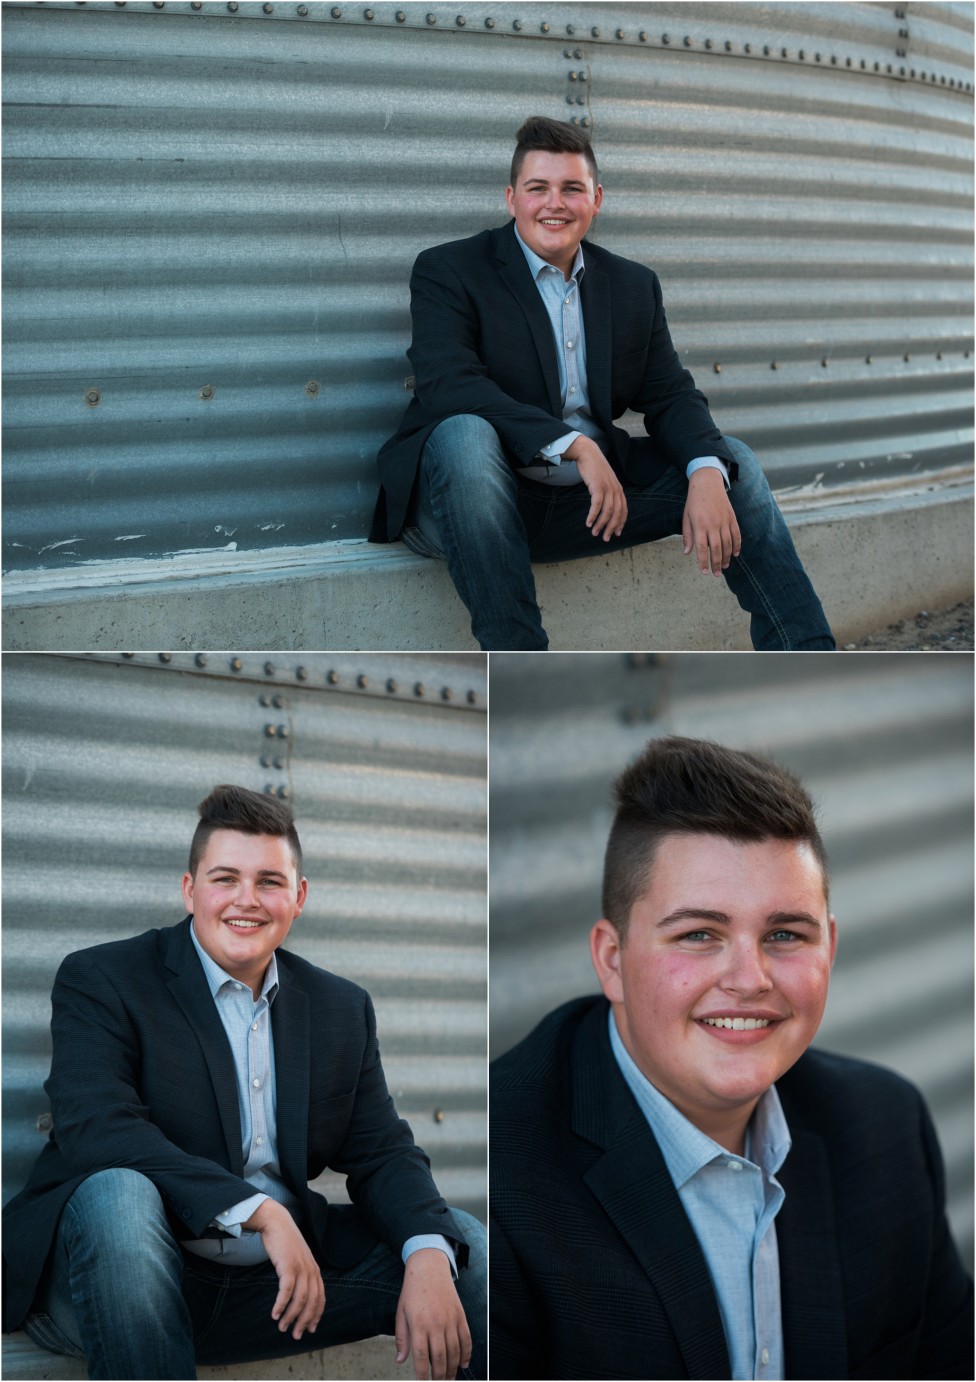 View More: http://mistycphotography.pass.us/davids-senior-session